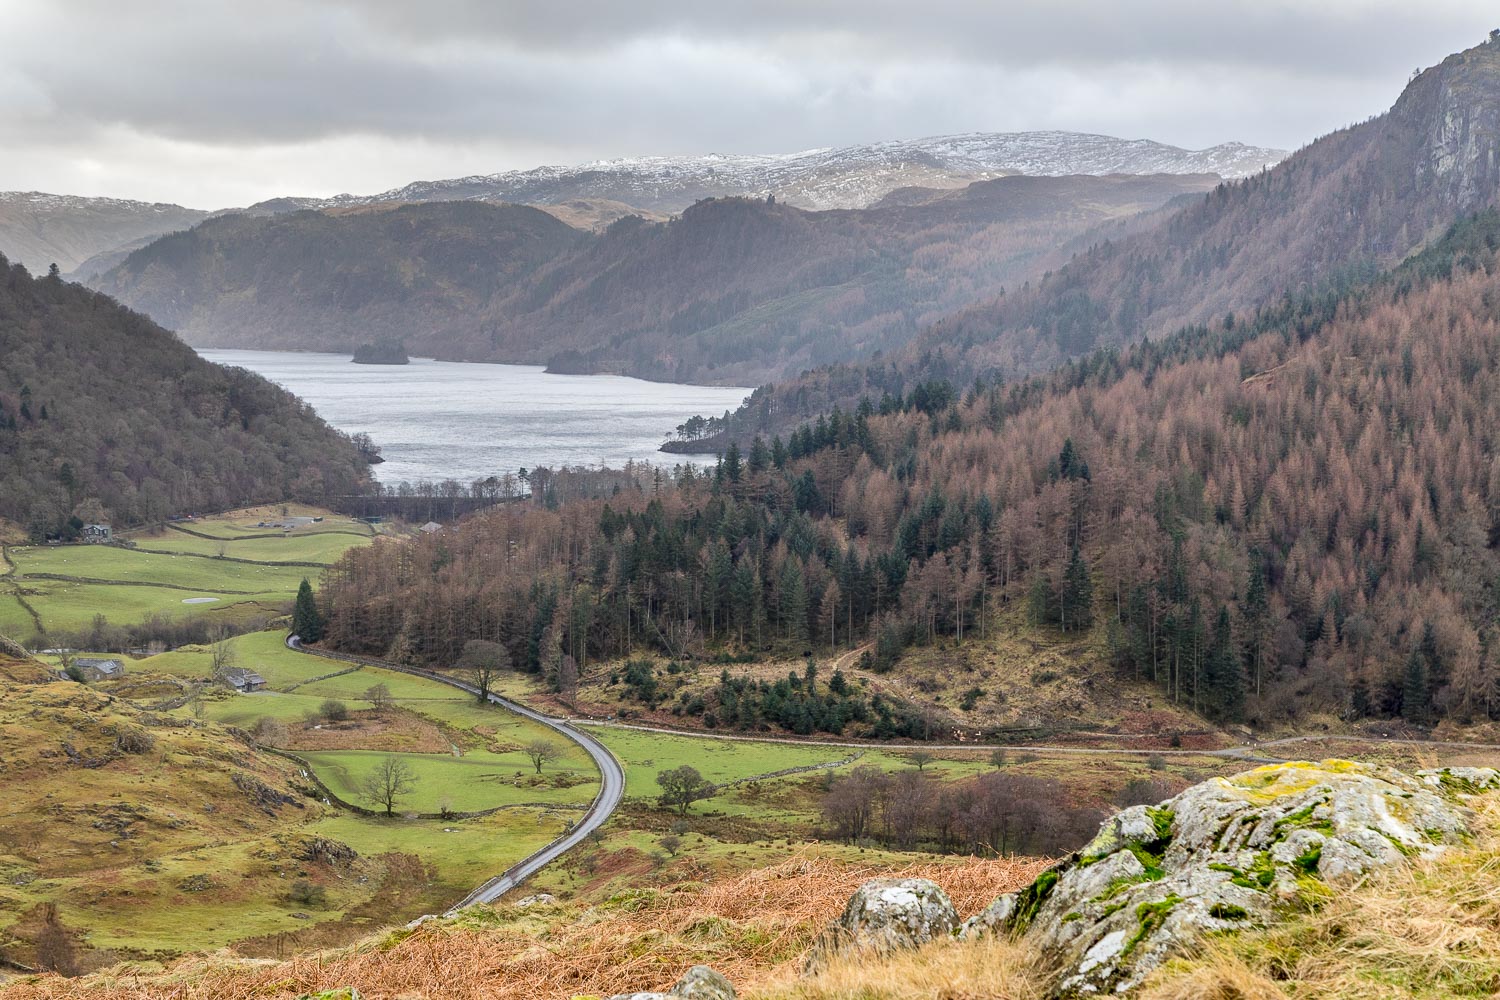 Thirlmere from High Rigg